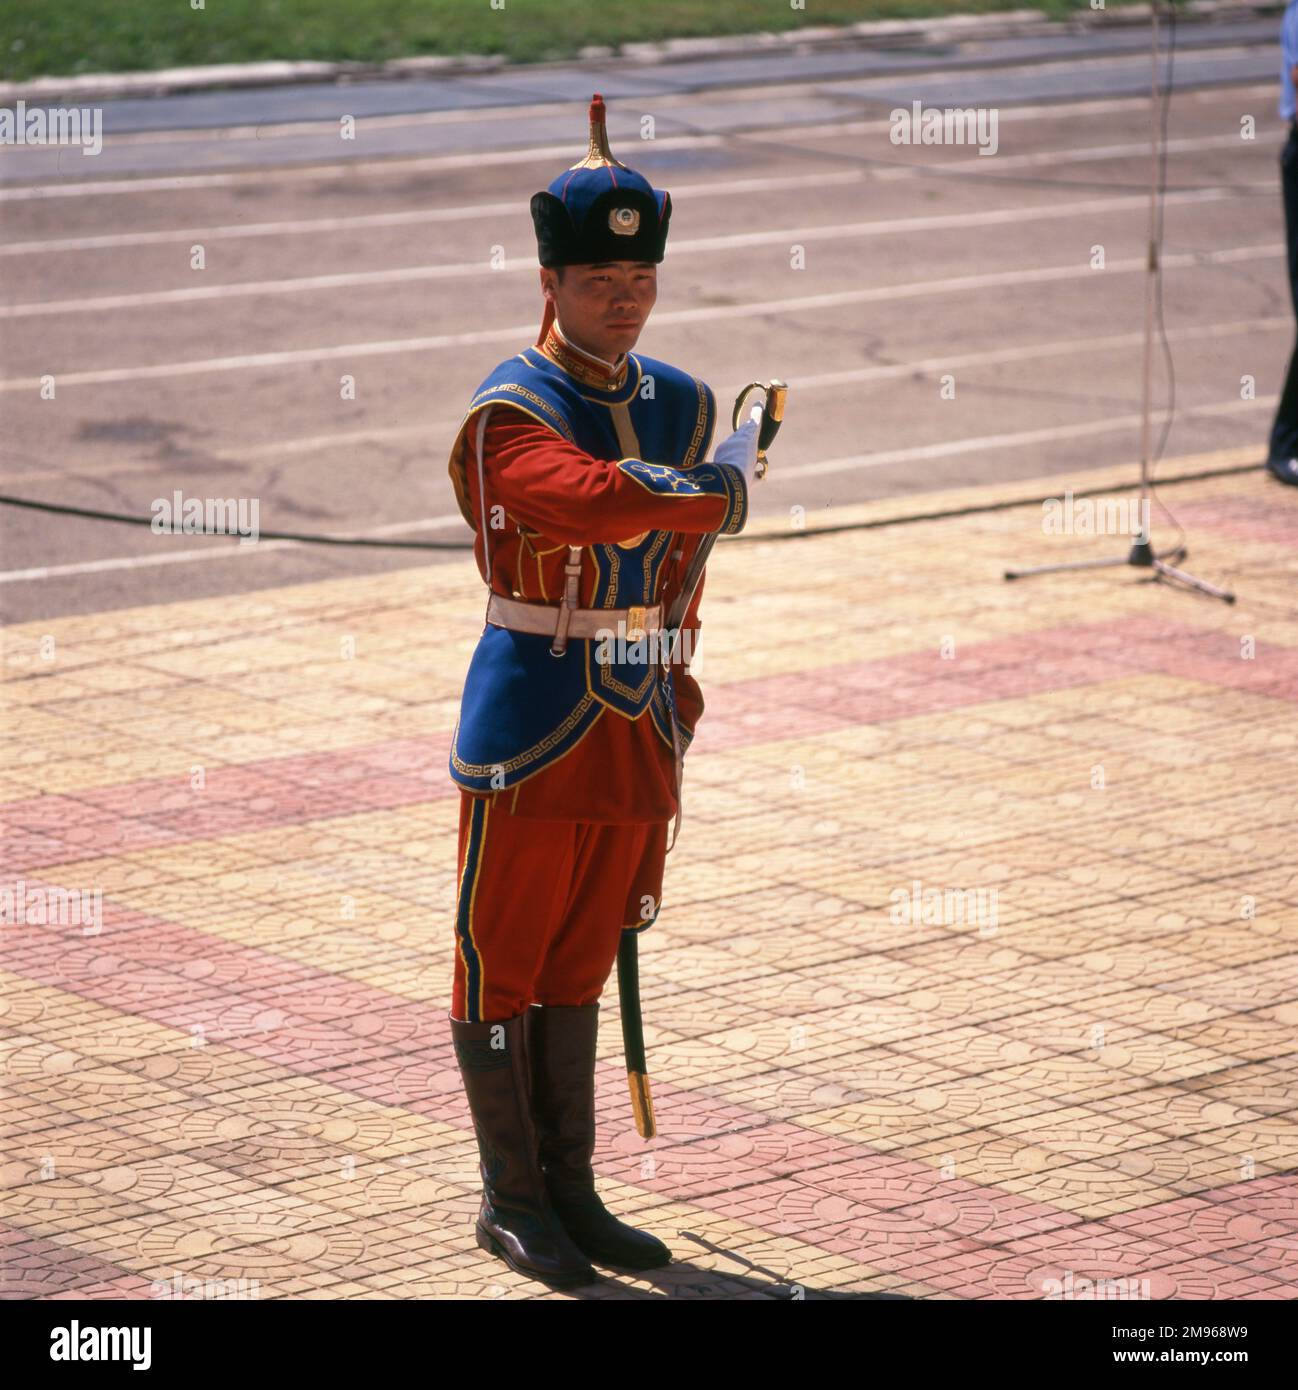 A National Guardsman in uniform during the Naadam Festival in the stadium at Ulaanbaatar (or Ulan Bator), capital of Mongolia.  Typical games played during this competitive festival are wrestling, archery and horse racing. Stock Photo